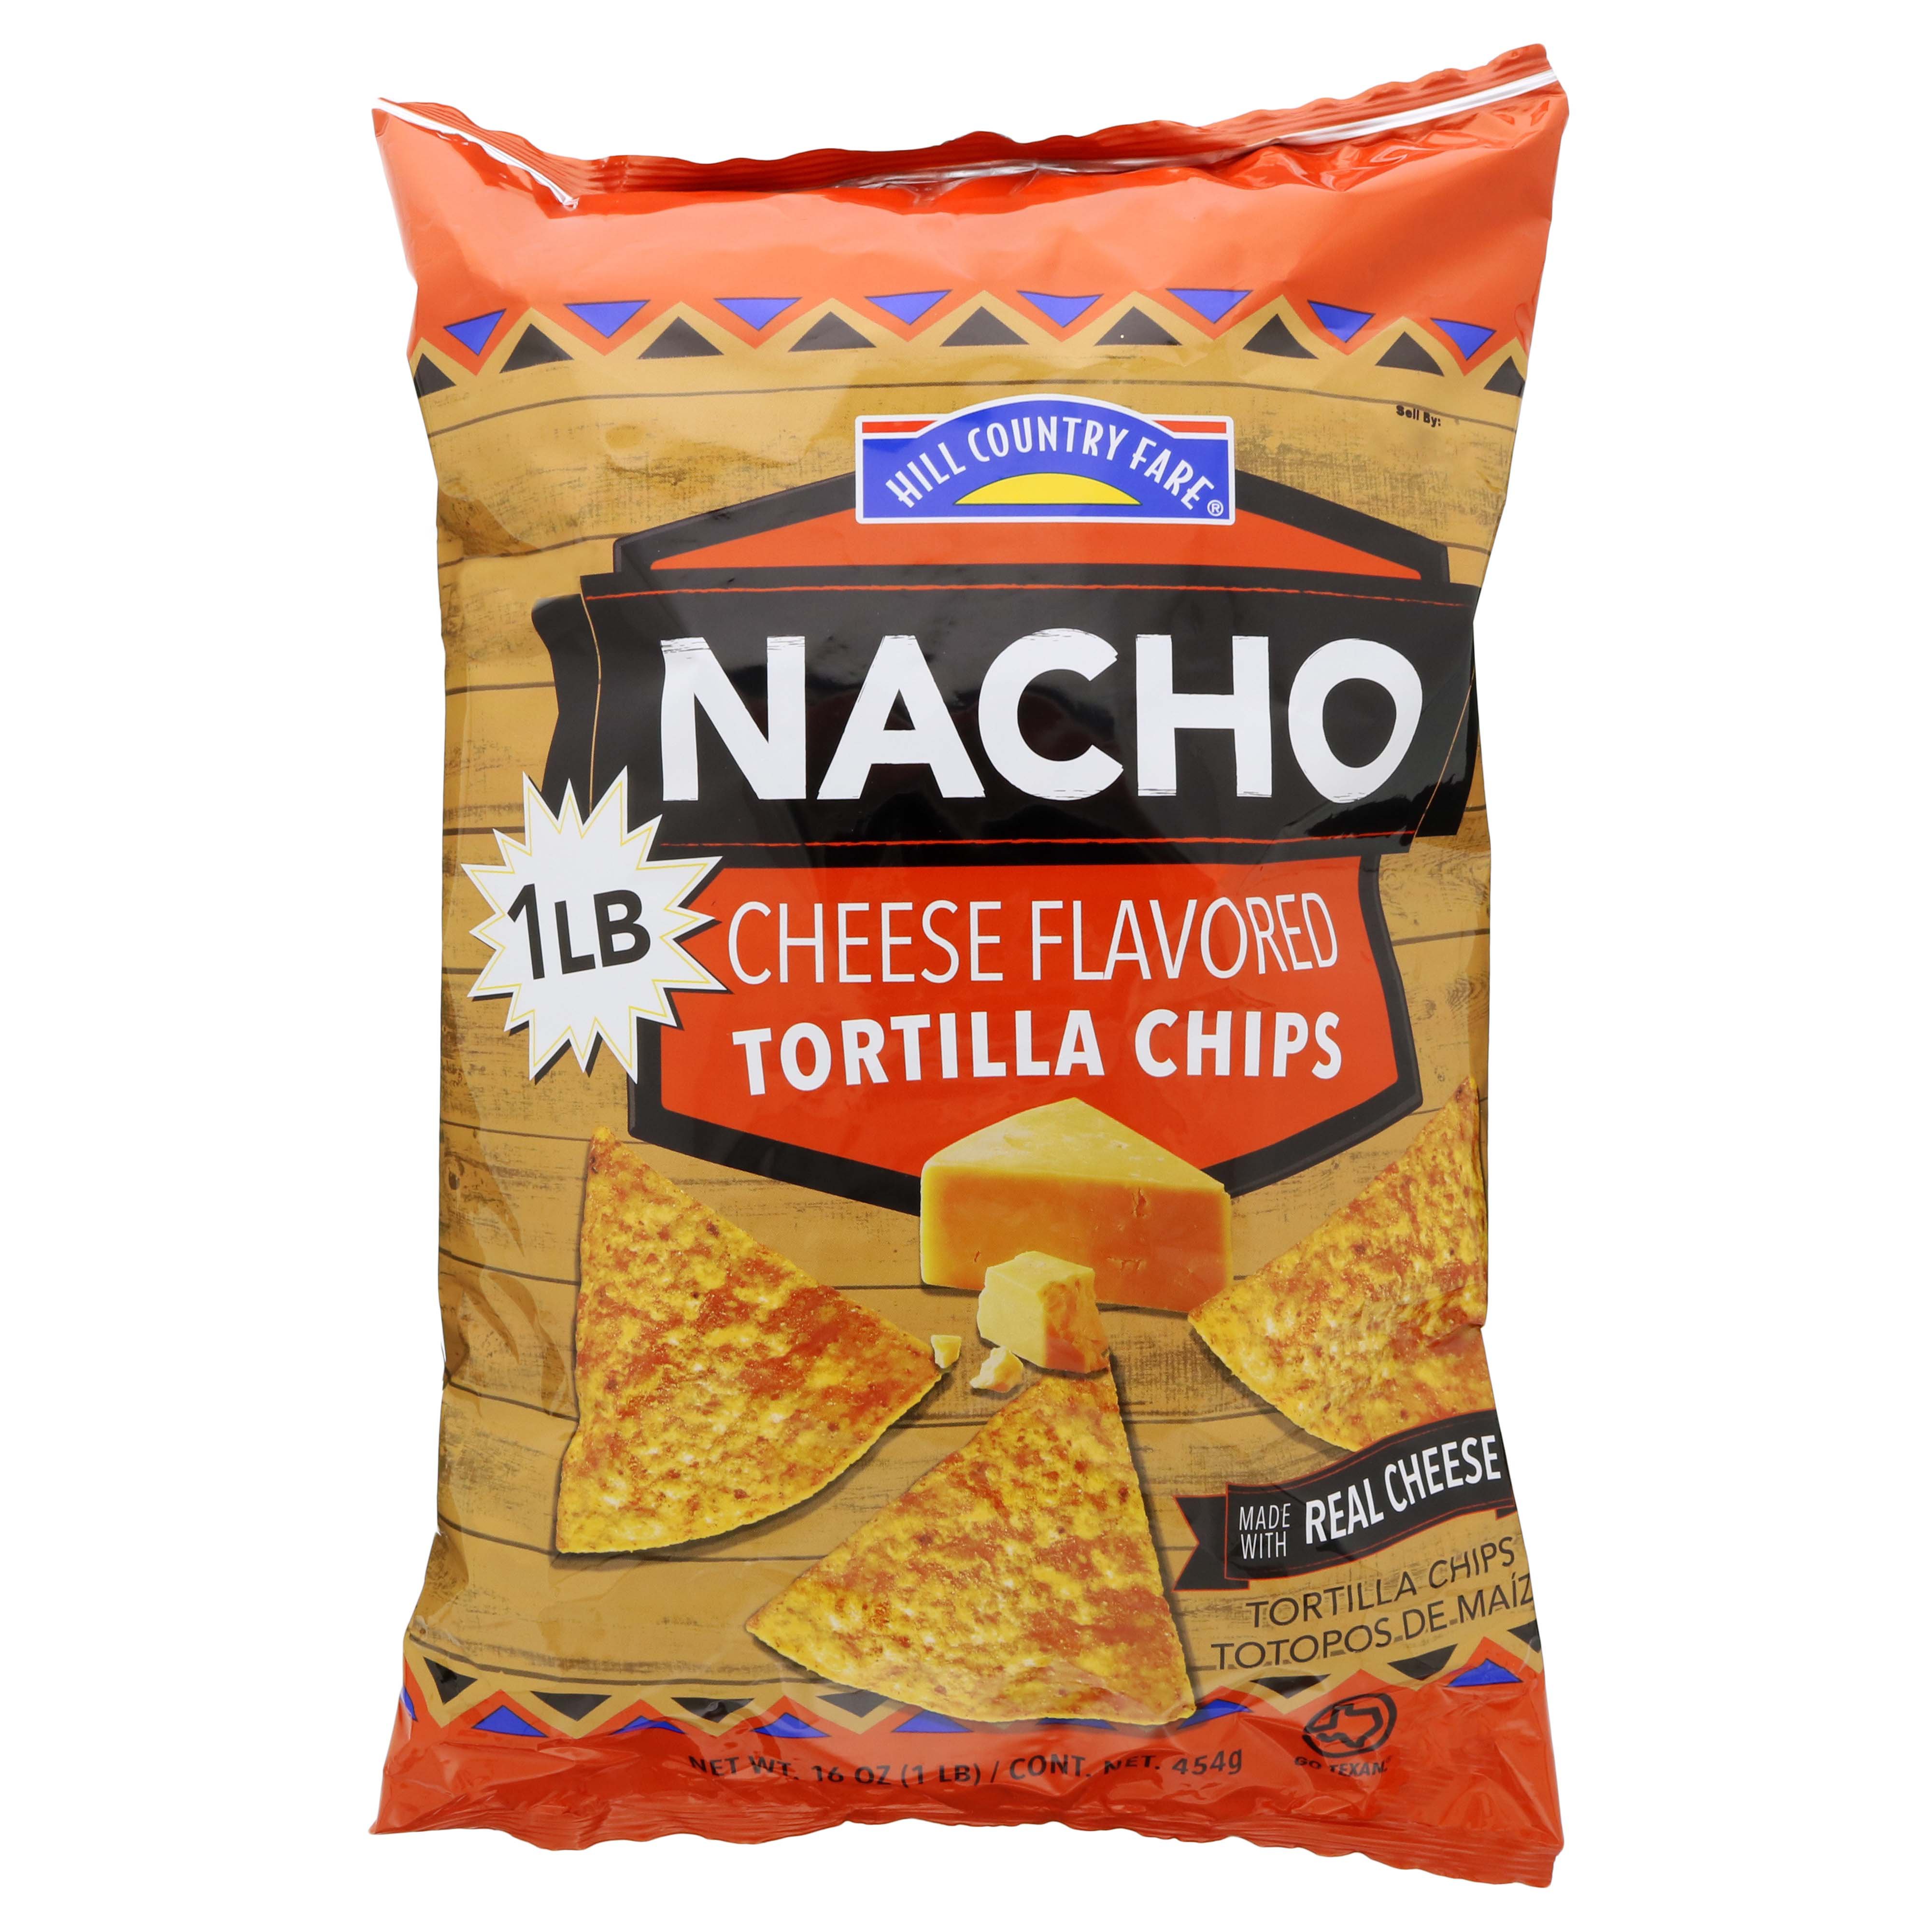 H-E-B Party Size Nacho Cheese Flavored Tortilla Chips - Shop Chips at H-E-B